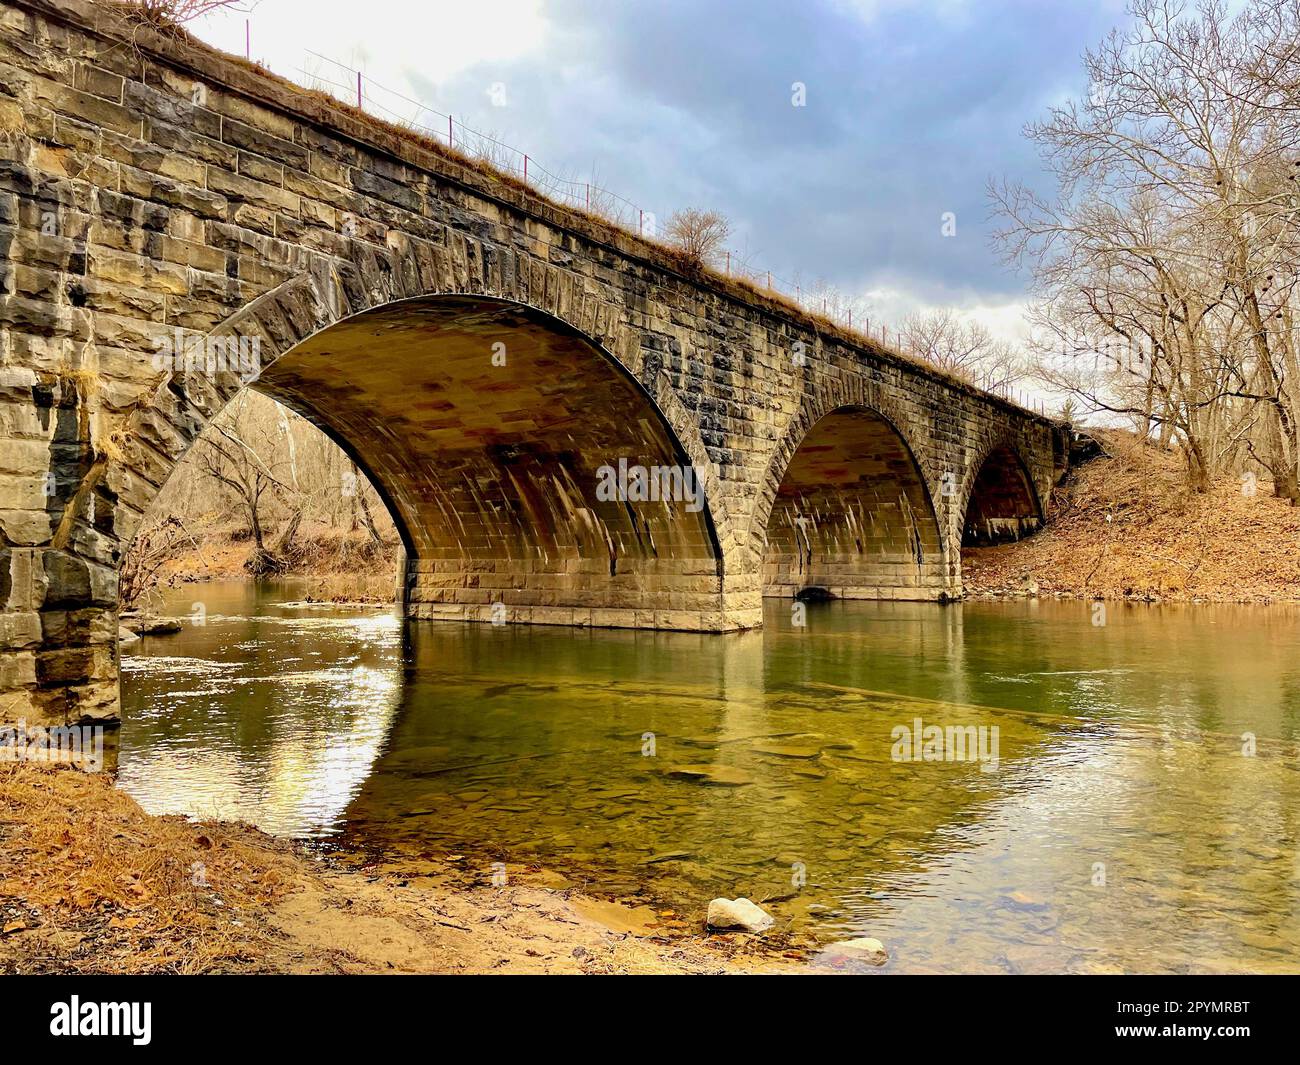 The Cacapon River flows beneath a historic stone railroad bridge used by freight trains and Amtrak passenger trains near the Potomac River. Stock Photo